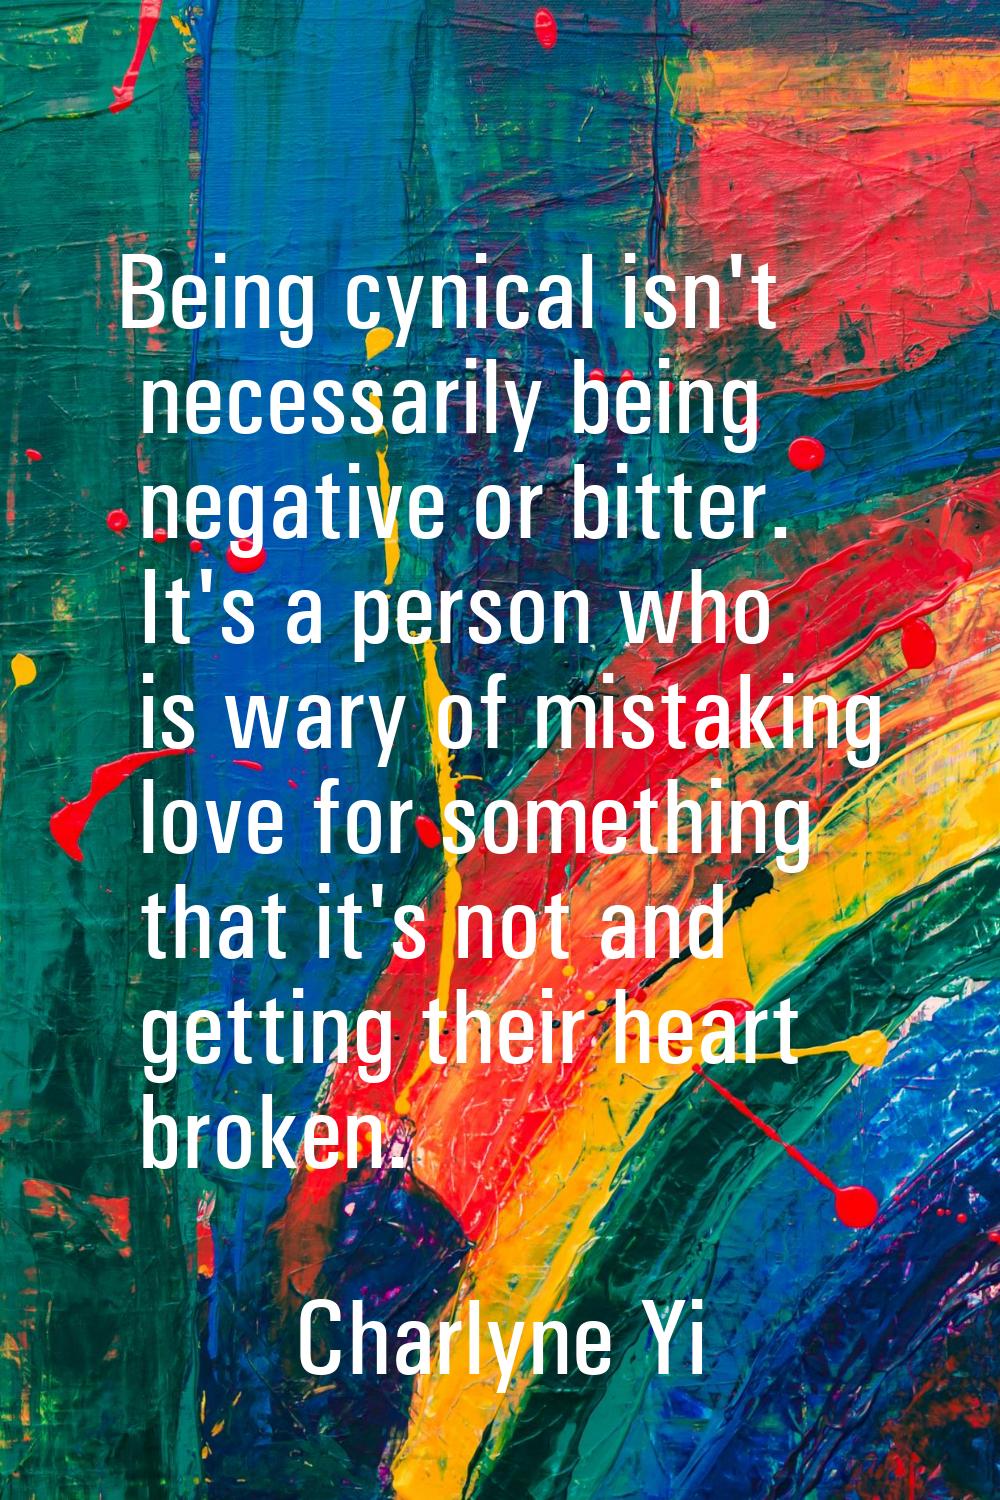 Being cynical isn't necessarily being negative or bitter. It's a person who is wary of mistaking lo